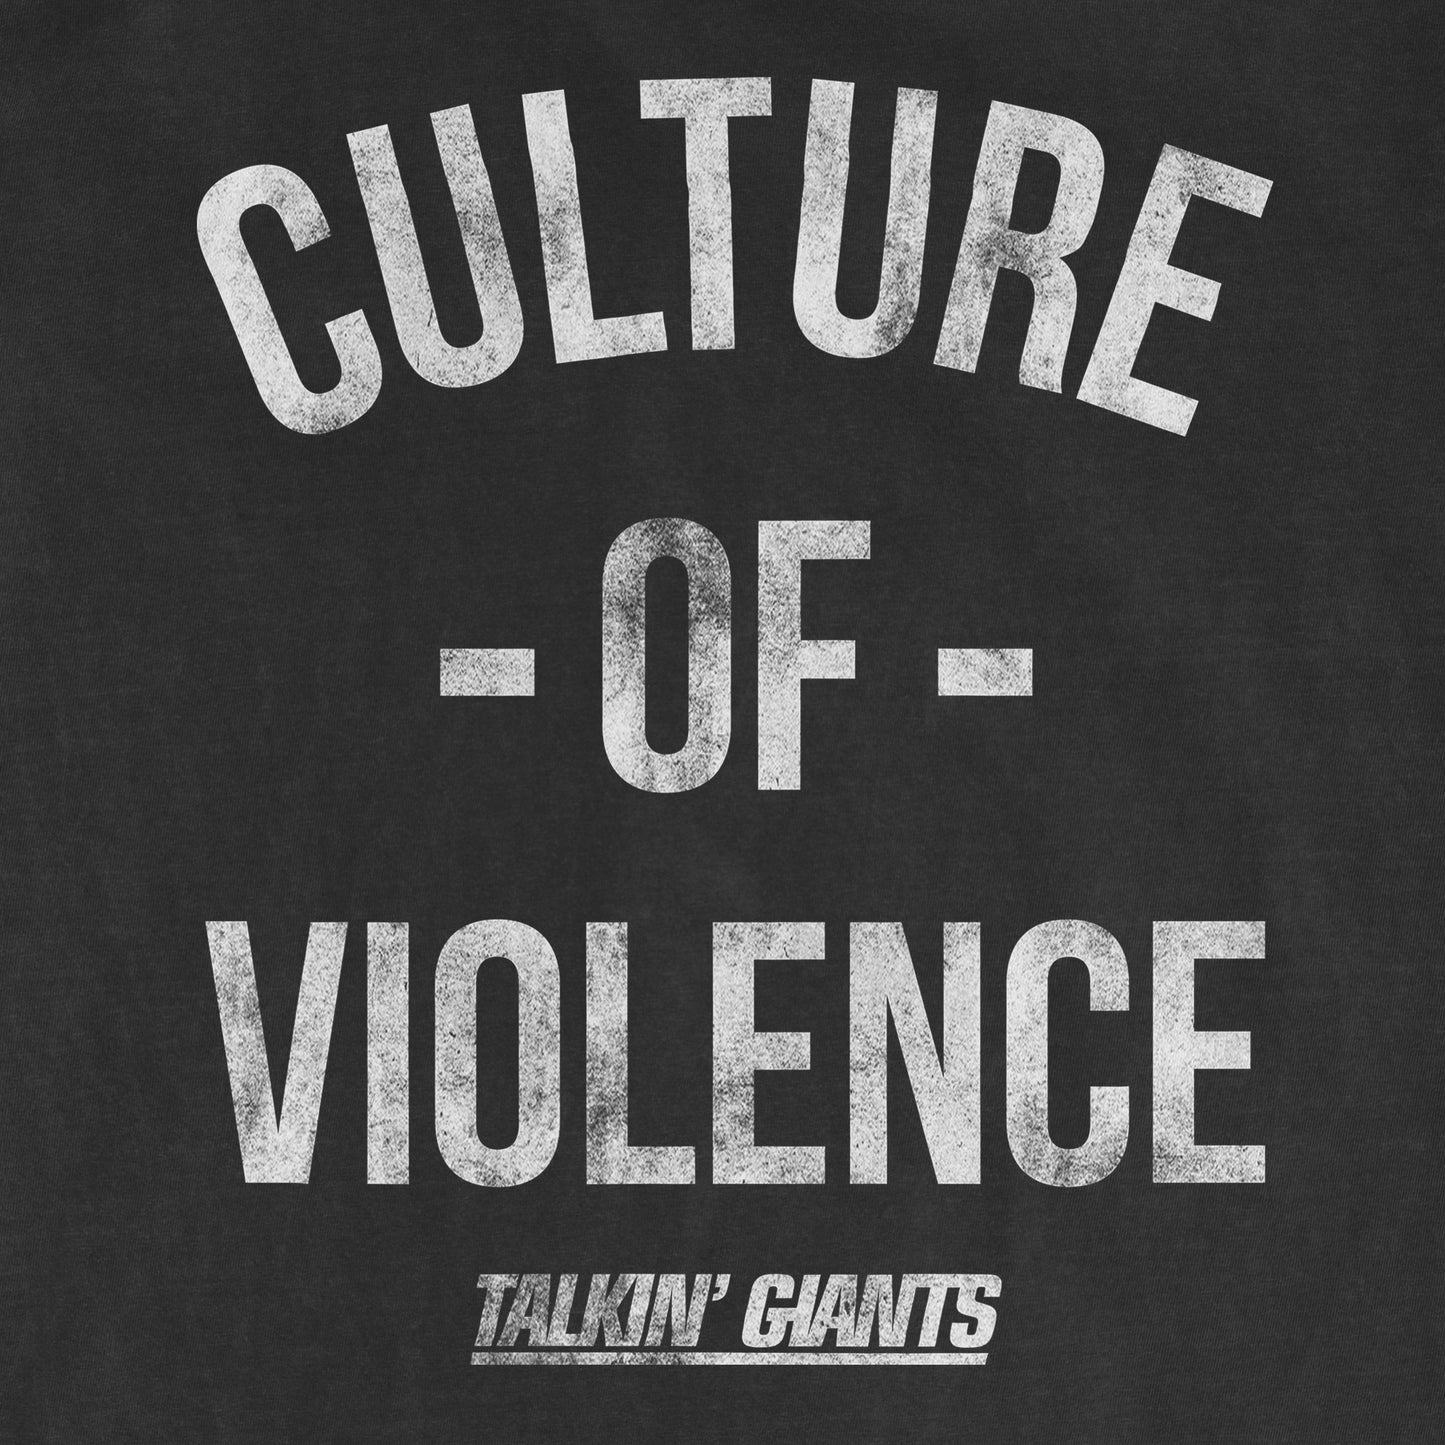 NYG "A Culture of Violence" | Comfort Colors® Vintage Tee